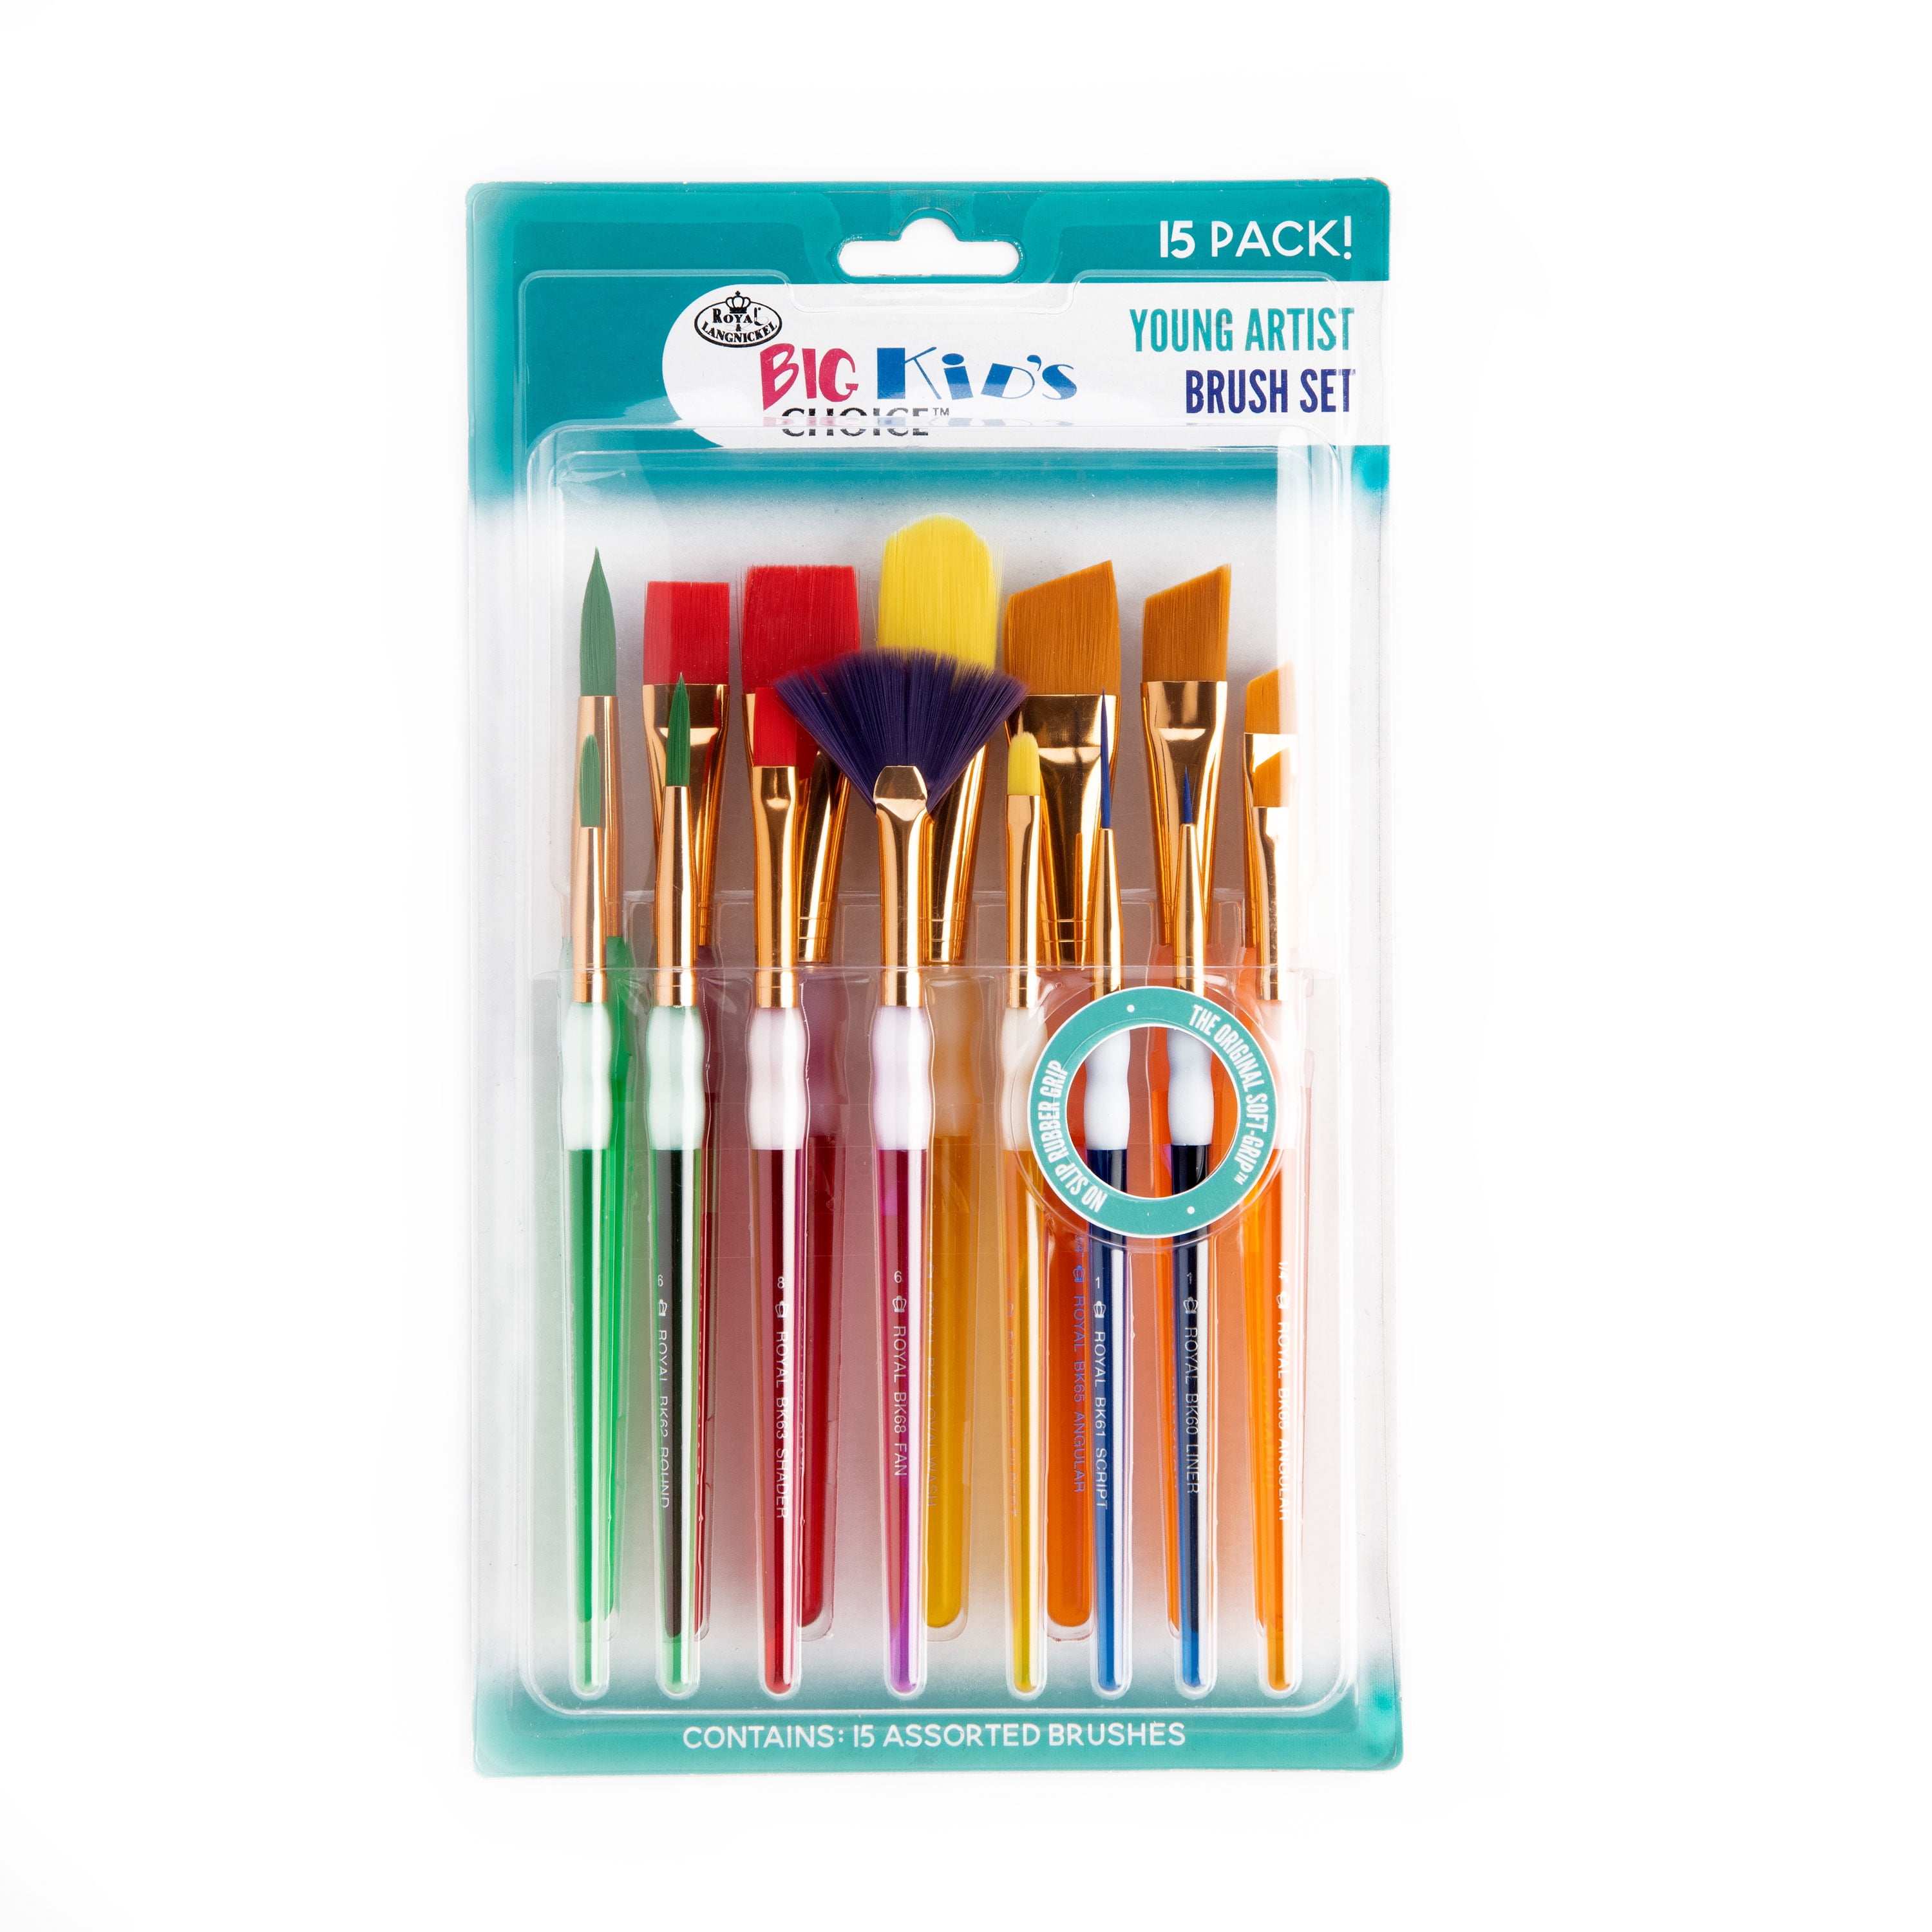 Paint Brushes for Kids, Paint Brush Set for Paint Party, Safe Toddler Paint  Brushes, Durable, Assorted Colors, 25 Pack - Toys 4 U